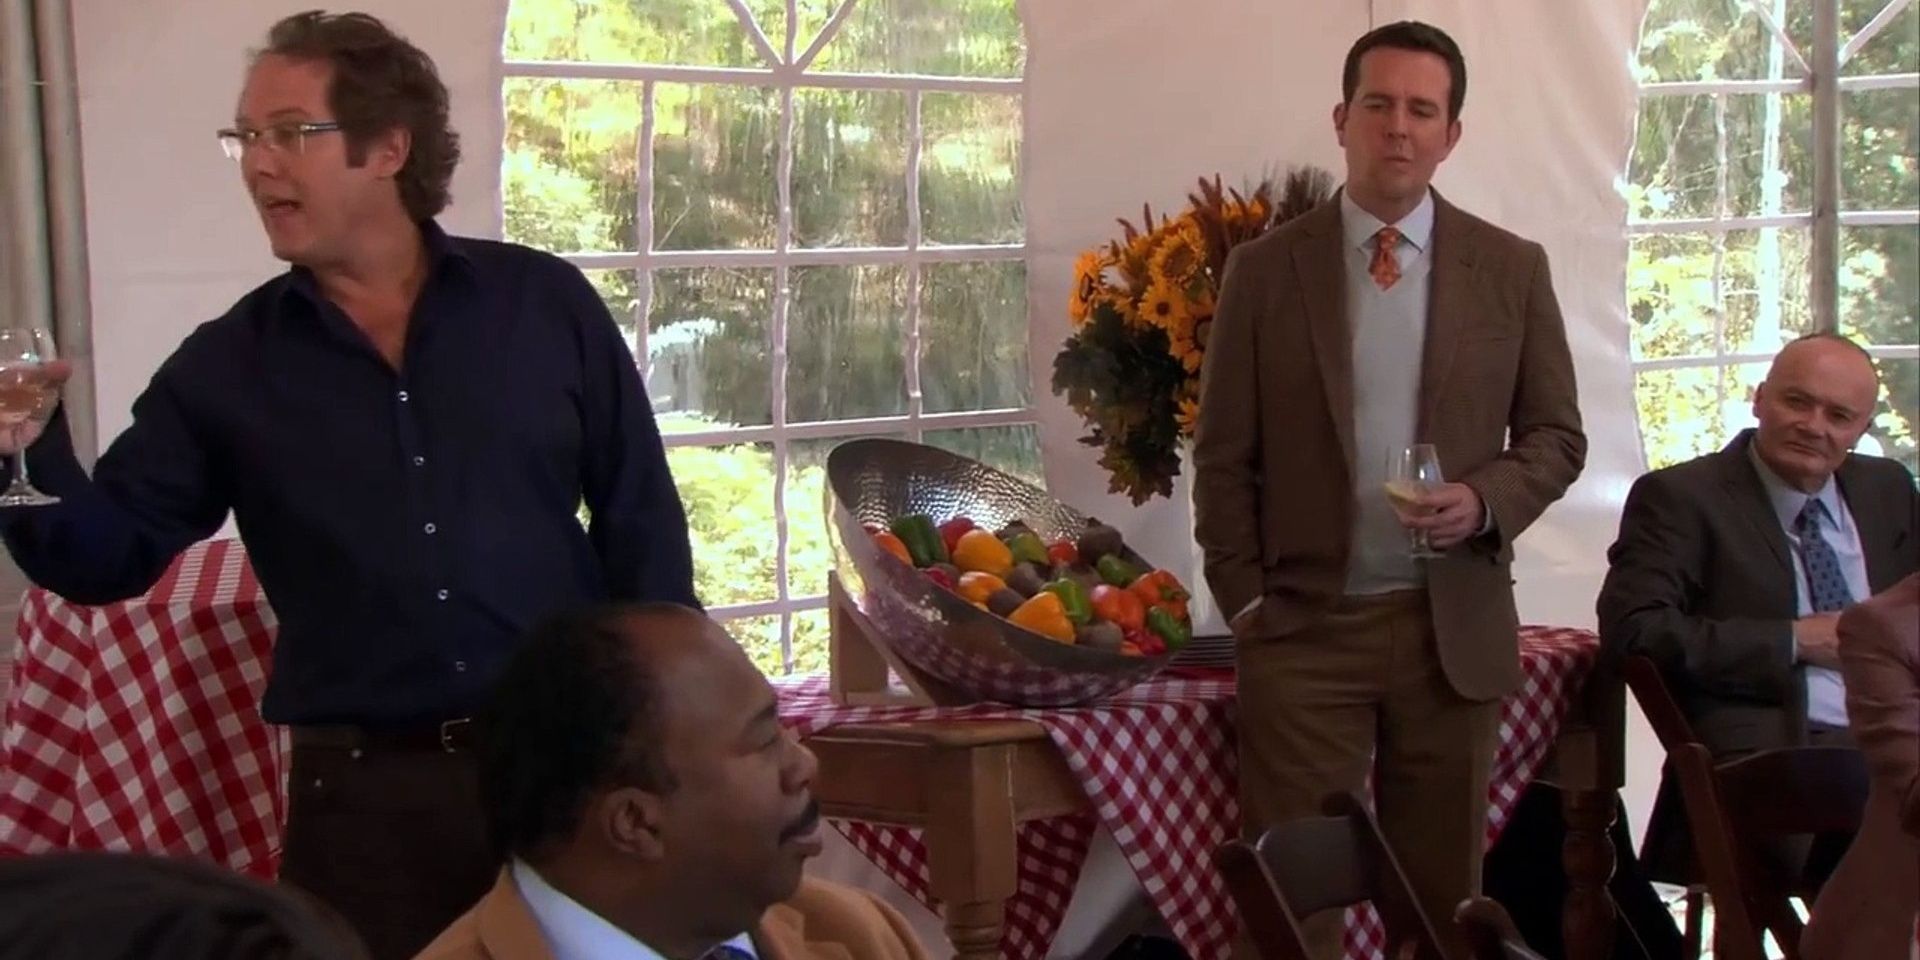 Robert California and Andy make a speech at the garden party on The Office